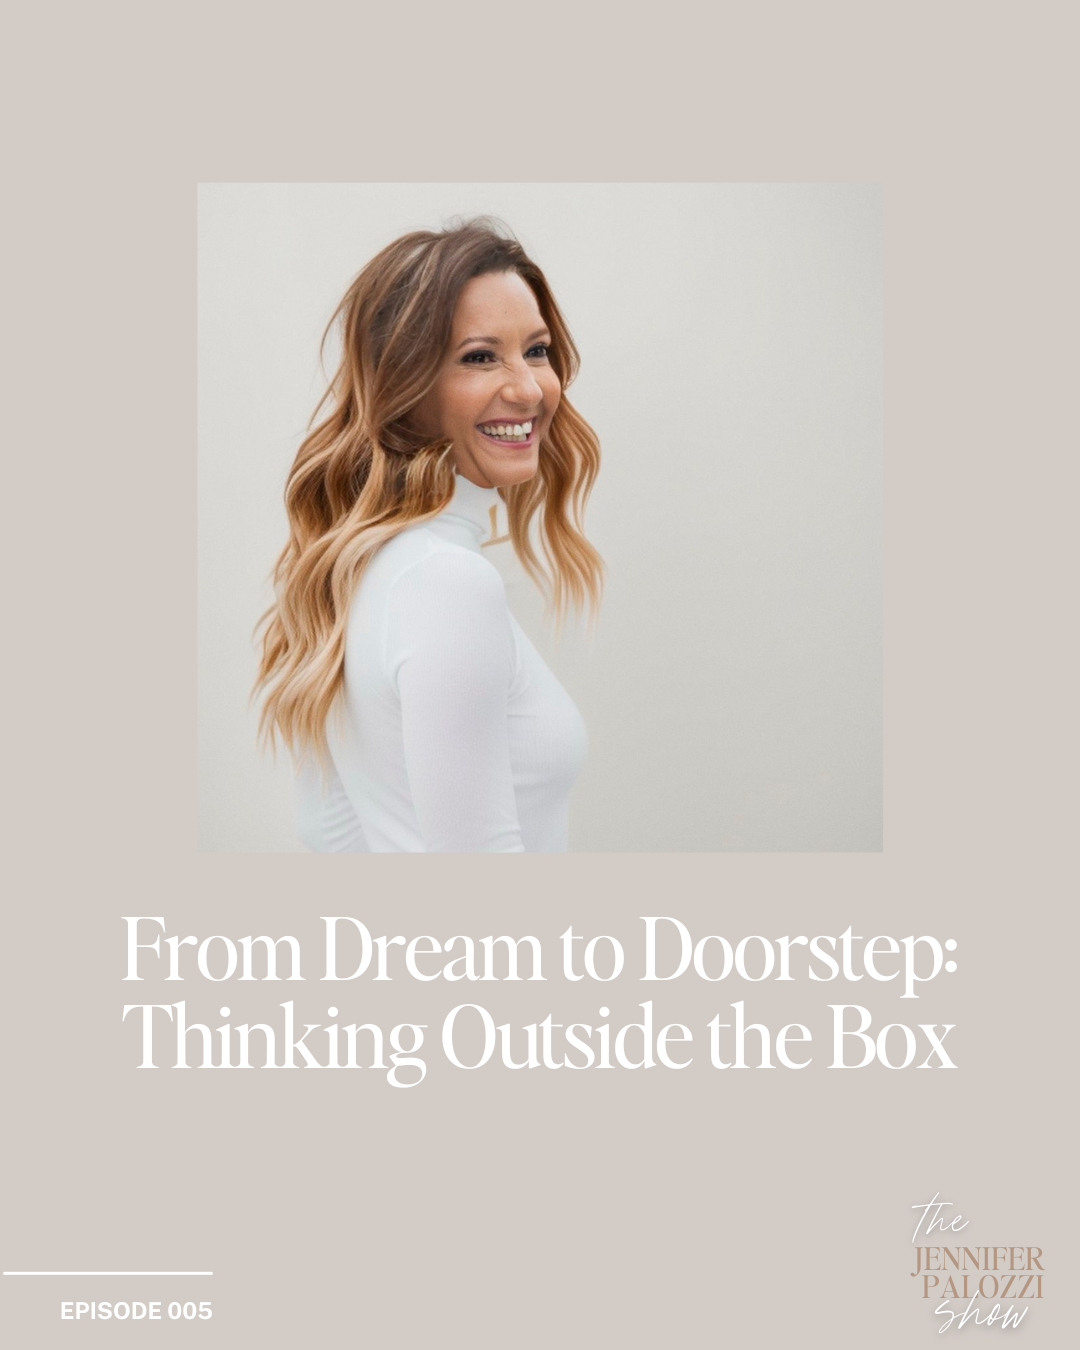 Episode 005 - From Dream to Doorstep: Thinking Outside the Box